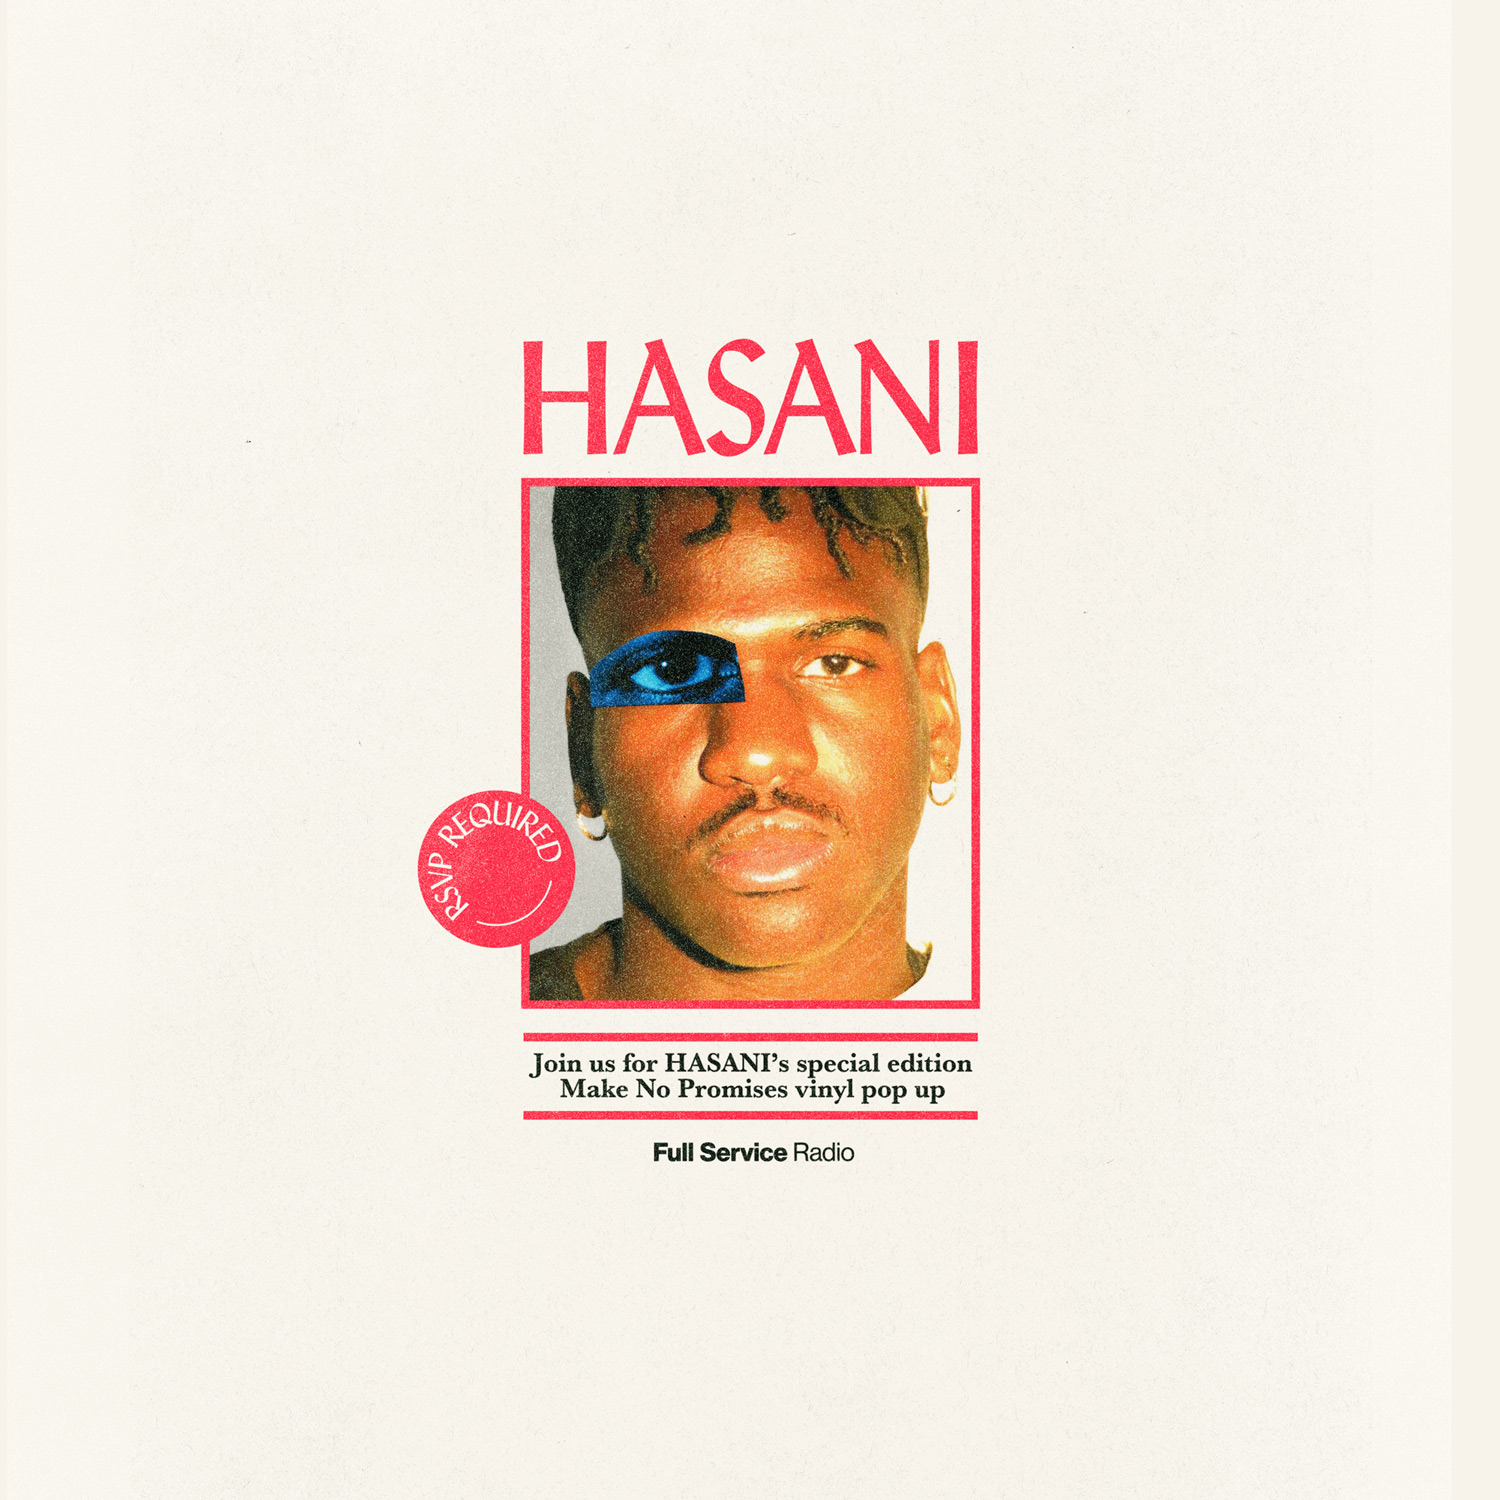 A brochure features "HASANI" with his photo and a brief description.